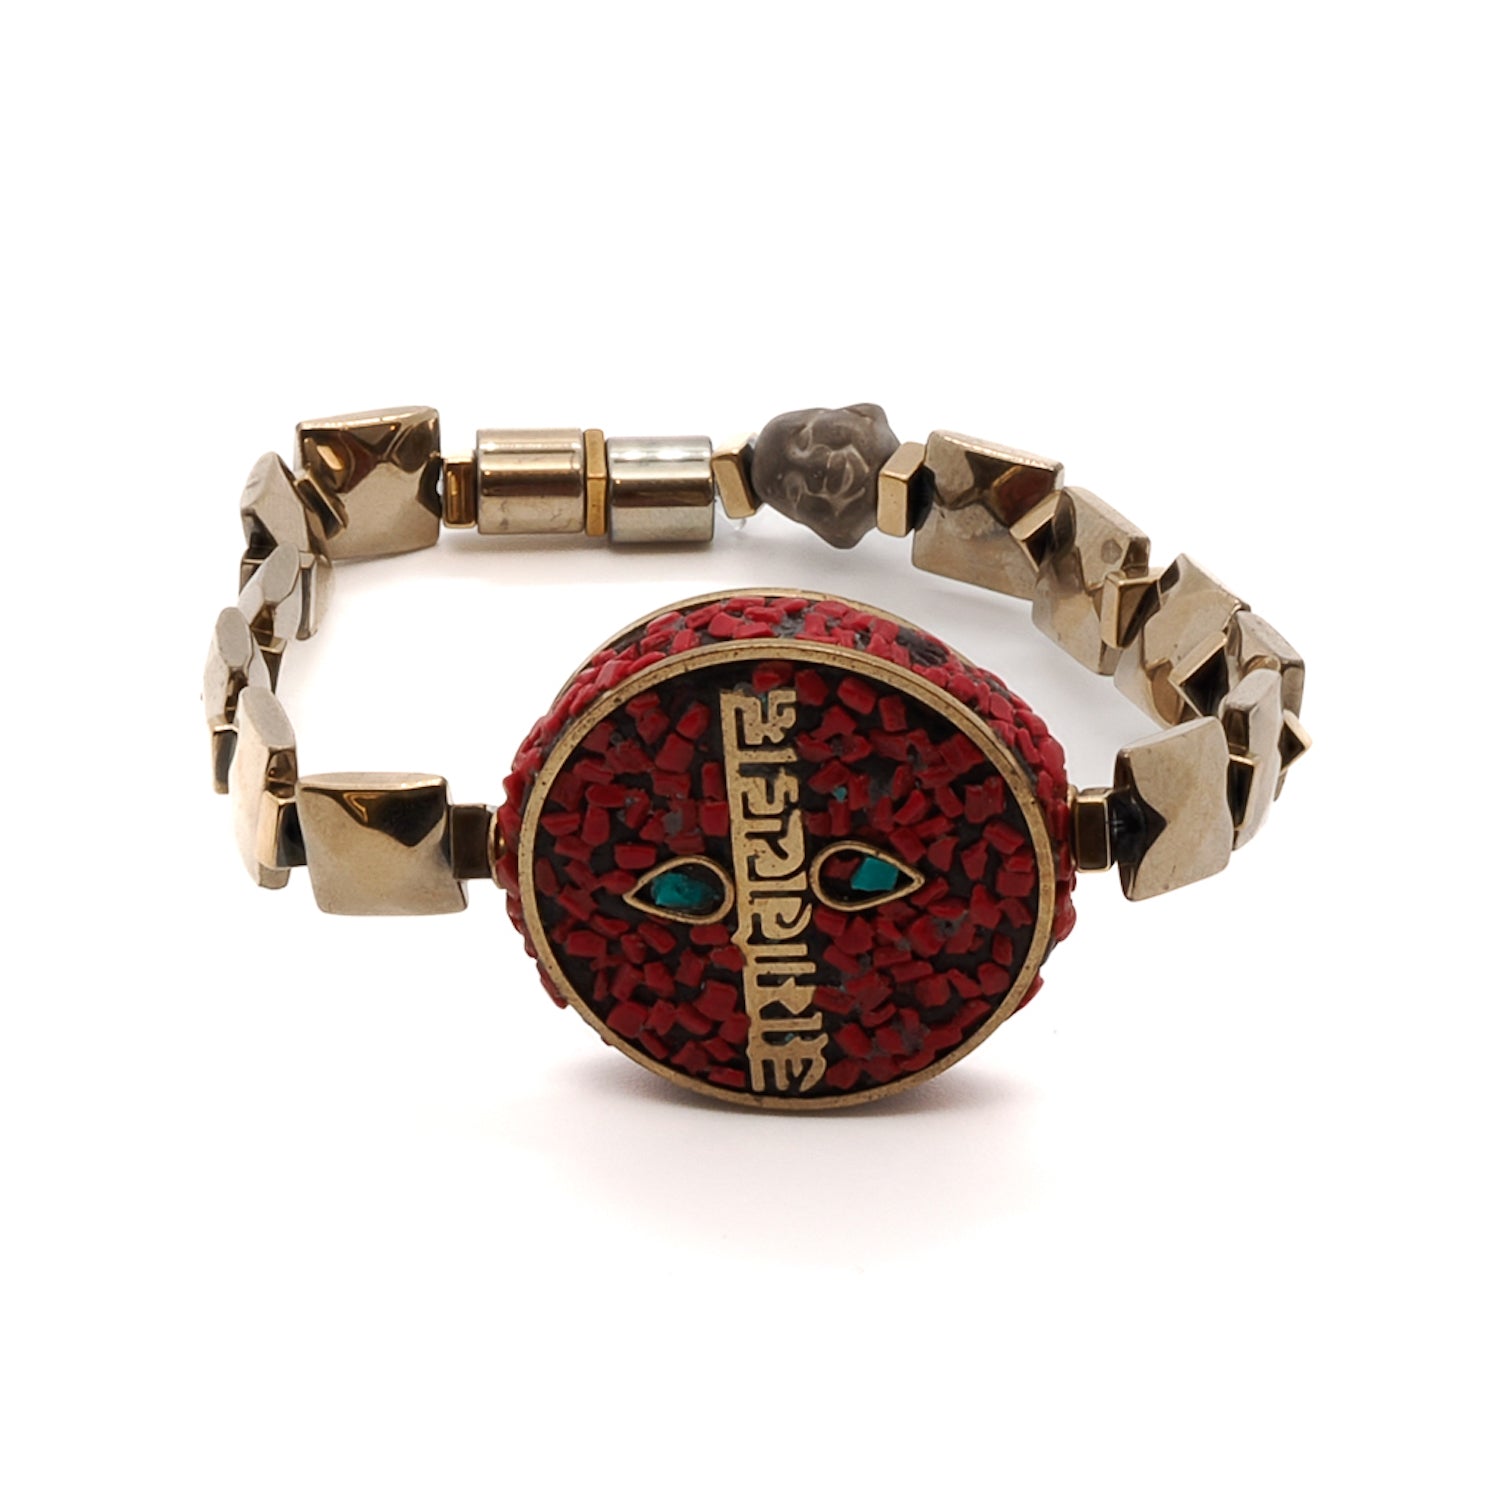 Embrace the spiritual energy of the Om Mani Padme Hum Coral Mantra Bracelet, featuring gold color hematite beads and a Nepal mantra bead.